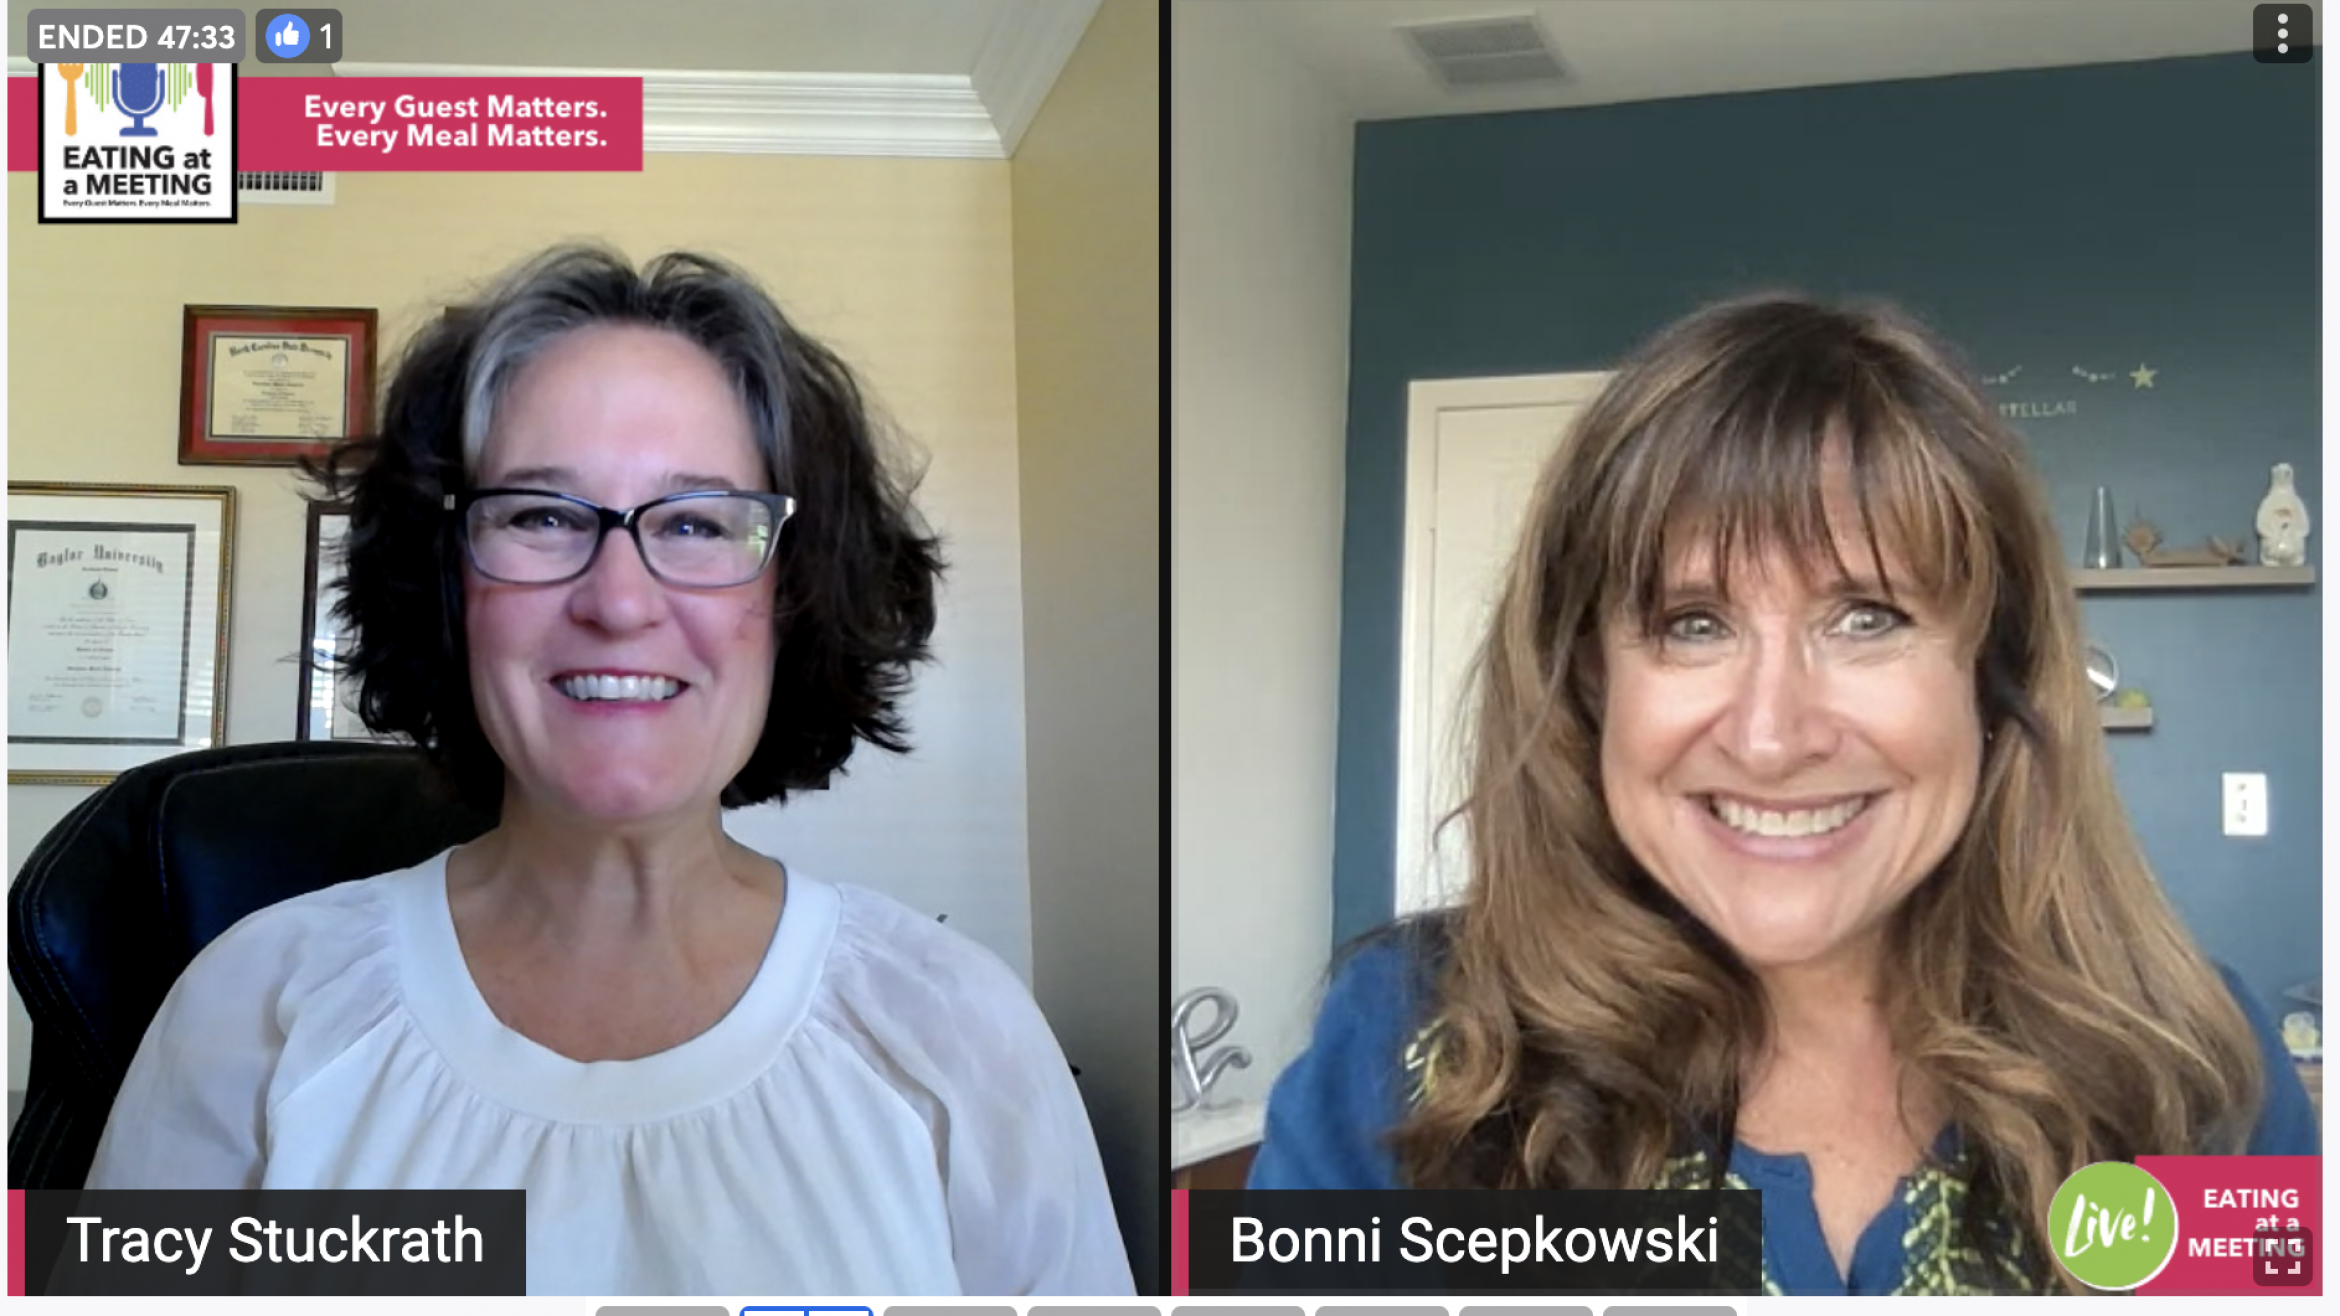 Two smiling women who are posing for a picture during the Eating at a Meeting LIVE podcast. Their photos are side by side. Bonni Scepkowski is with Stellar Meetings. Tracy Stuckrath, on the left hosts the podcast